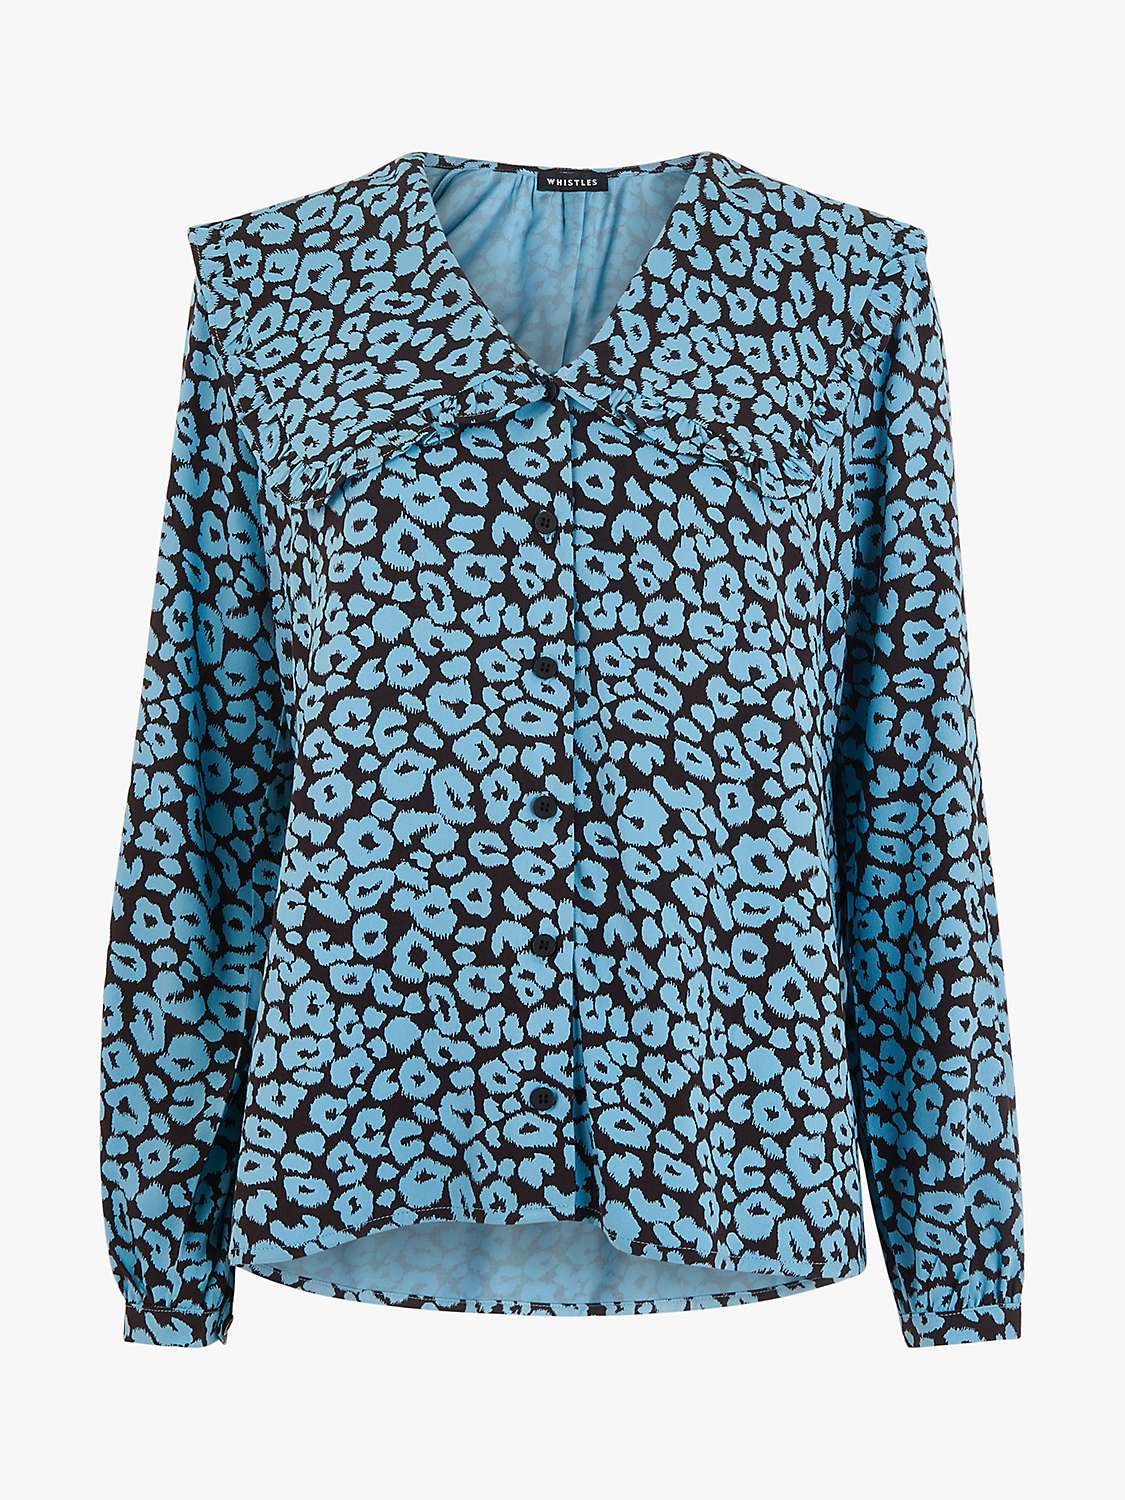 Buy Whistles Fuzzy Leopard Print Collar Blouse, Blue/Multi Online at johnlewis.com